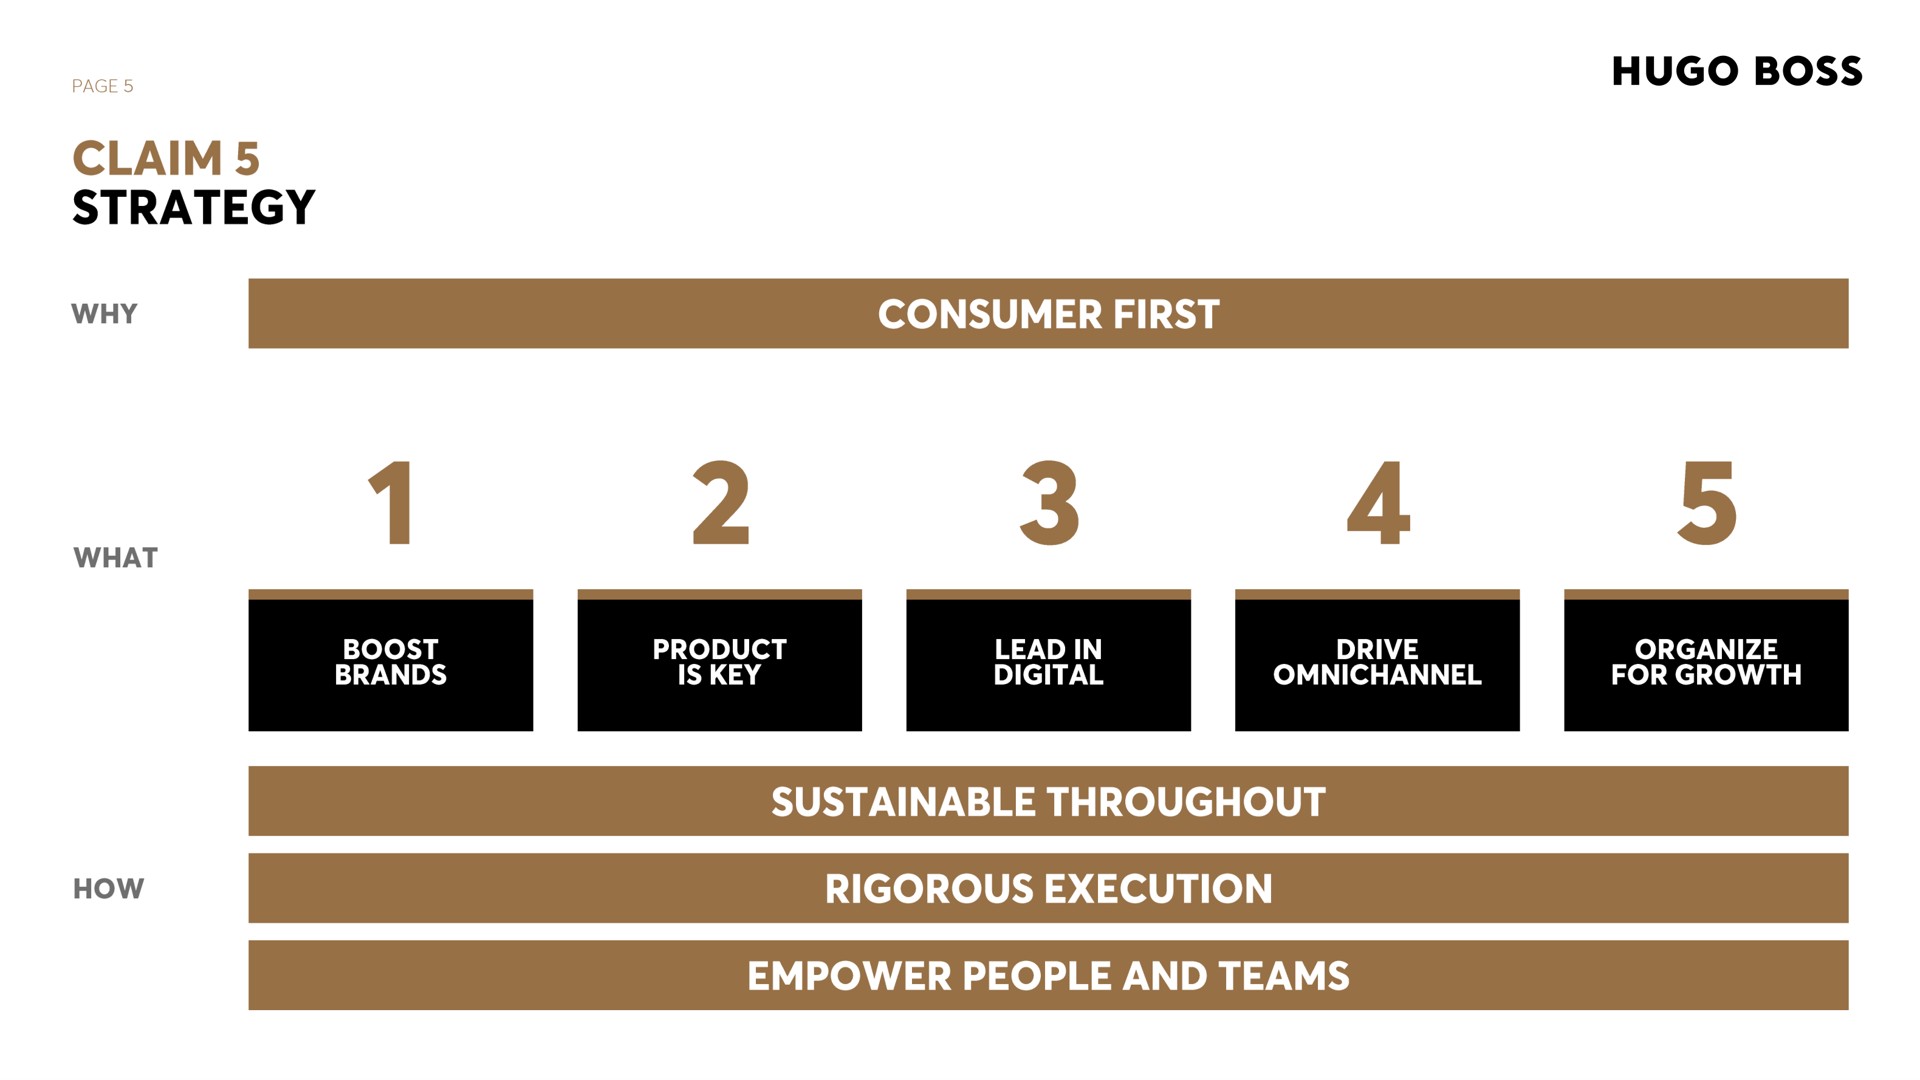 page claim strategy why boss consumer first sustainable throughout rigorous execution empower people and teams | Hugo Boss